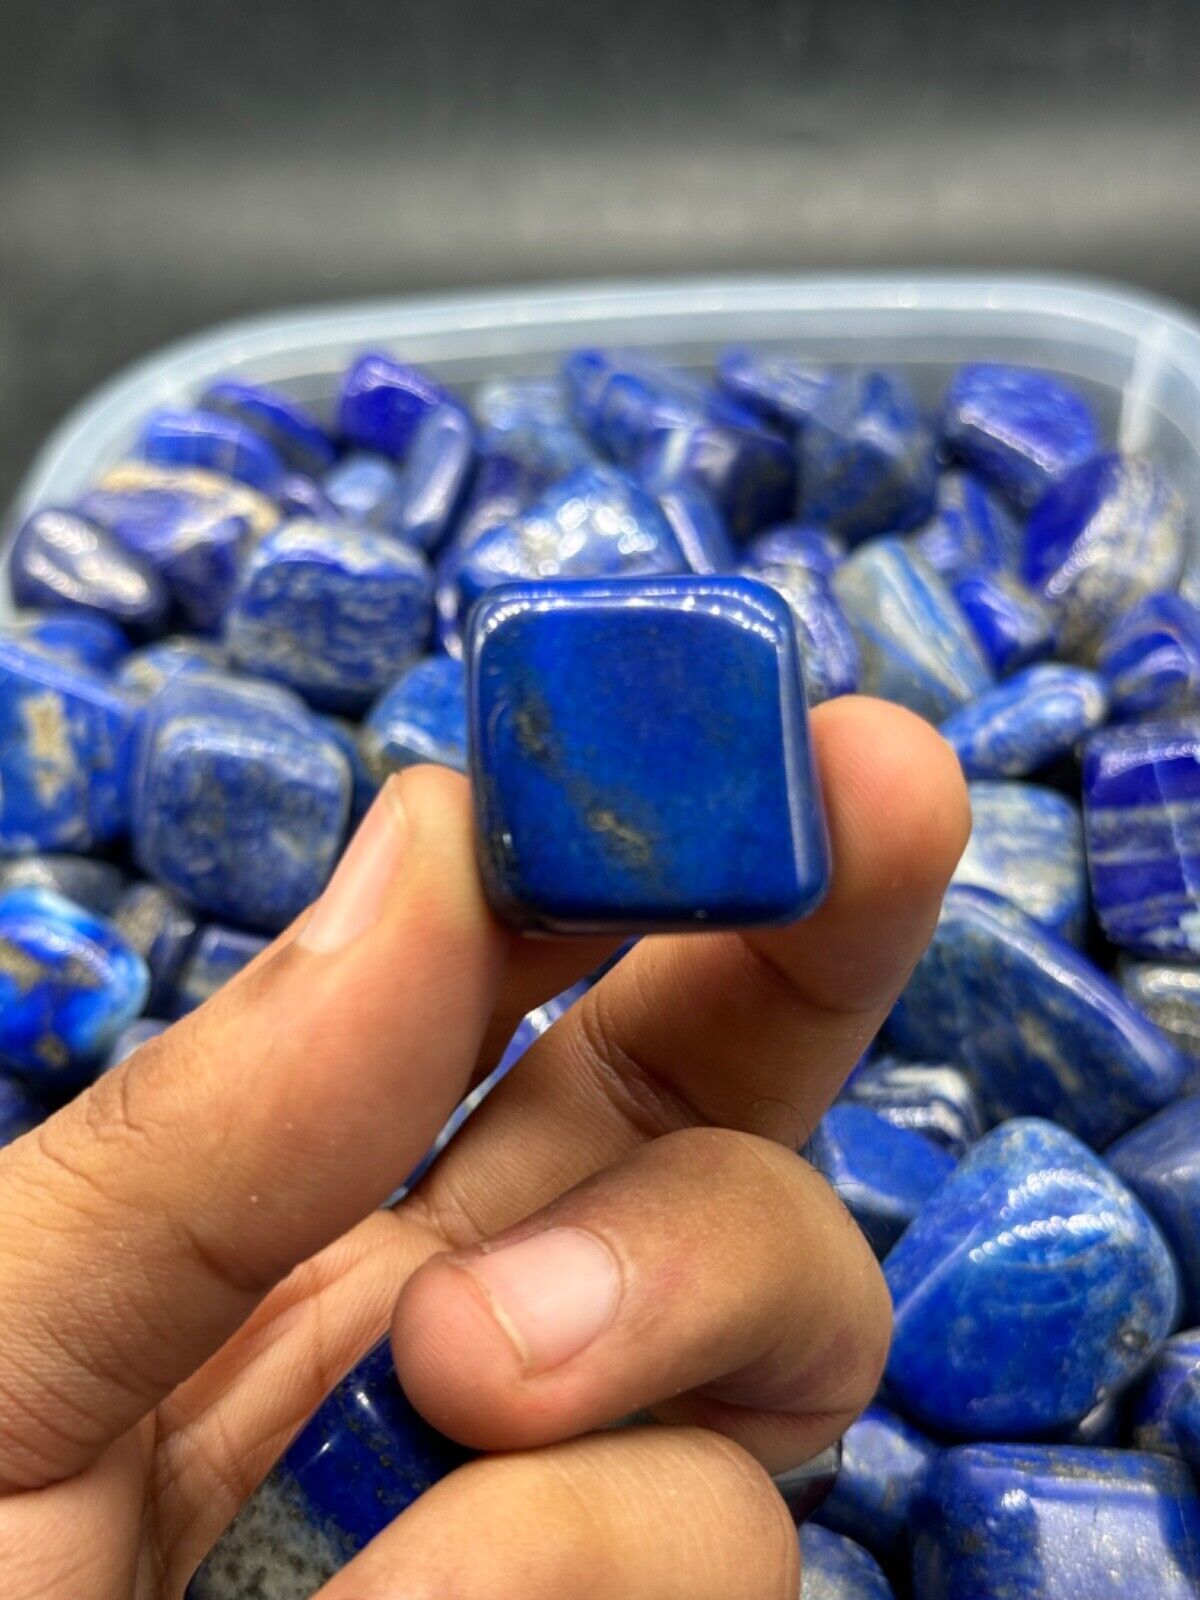 Royal Blue Lapis Lazuli with Pyrite From Afghanistan- wholesale price- 800 grams